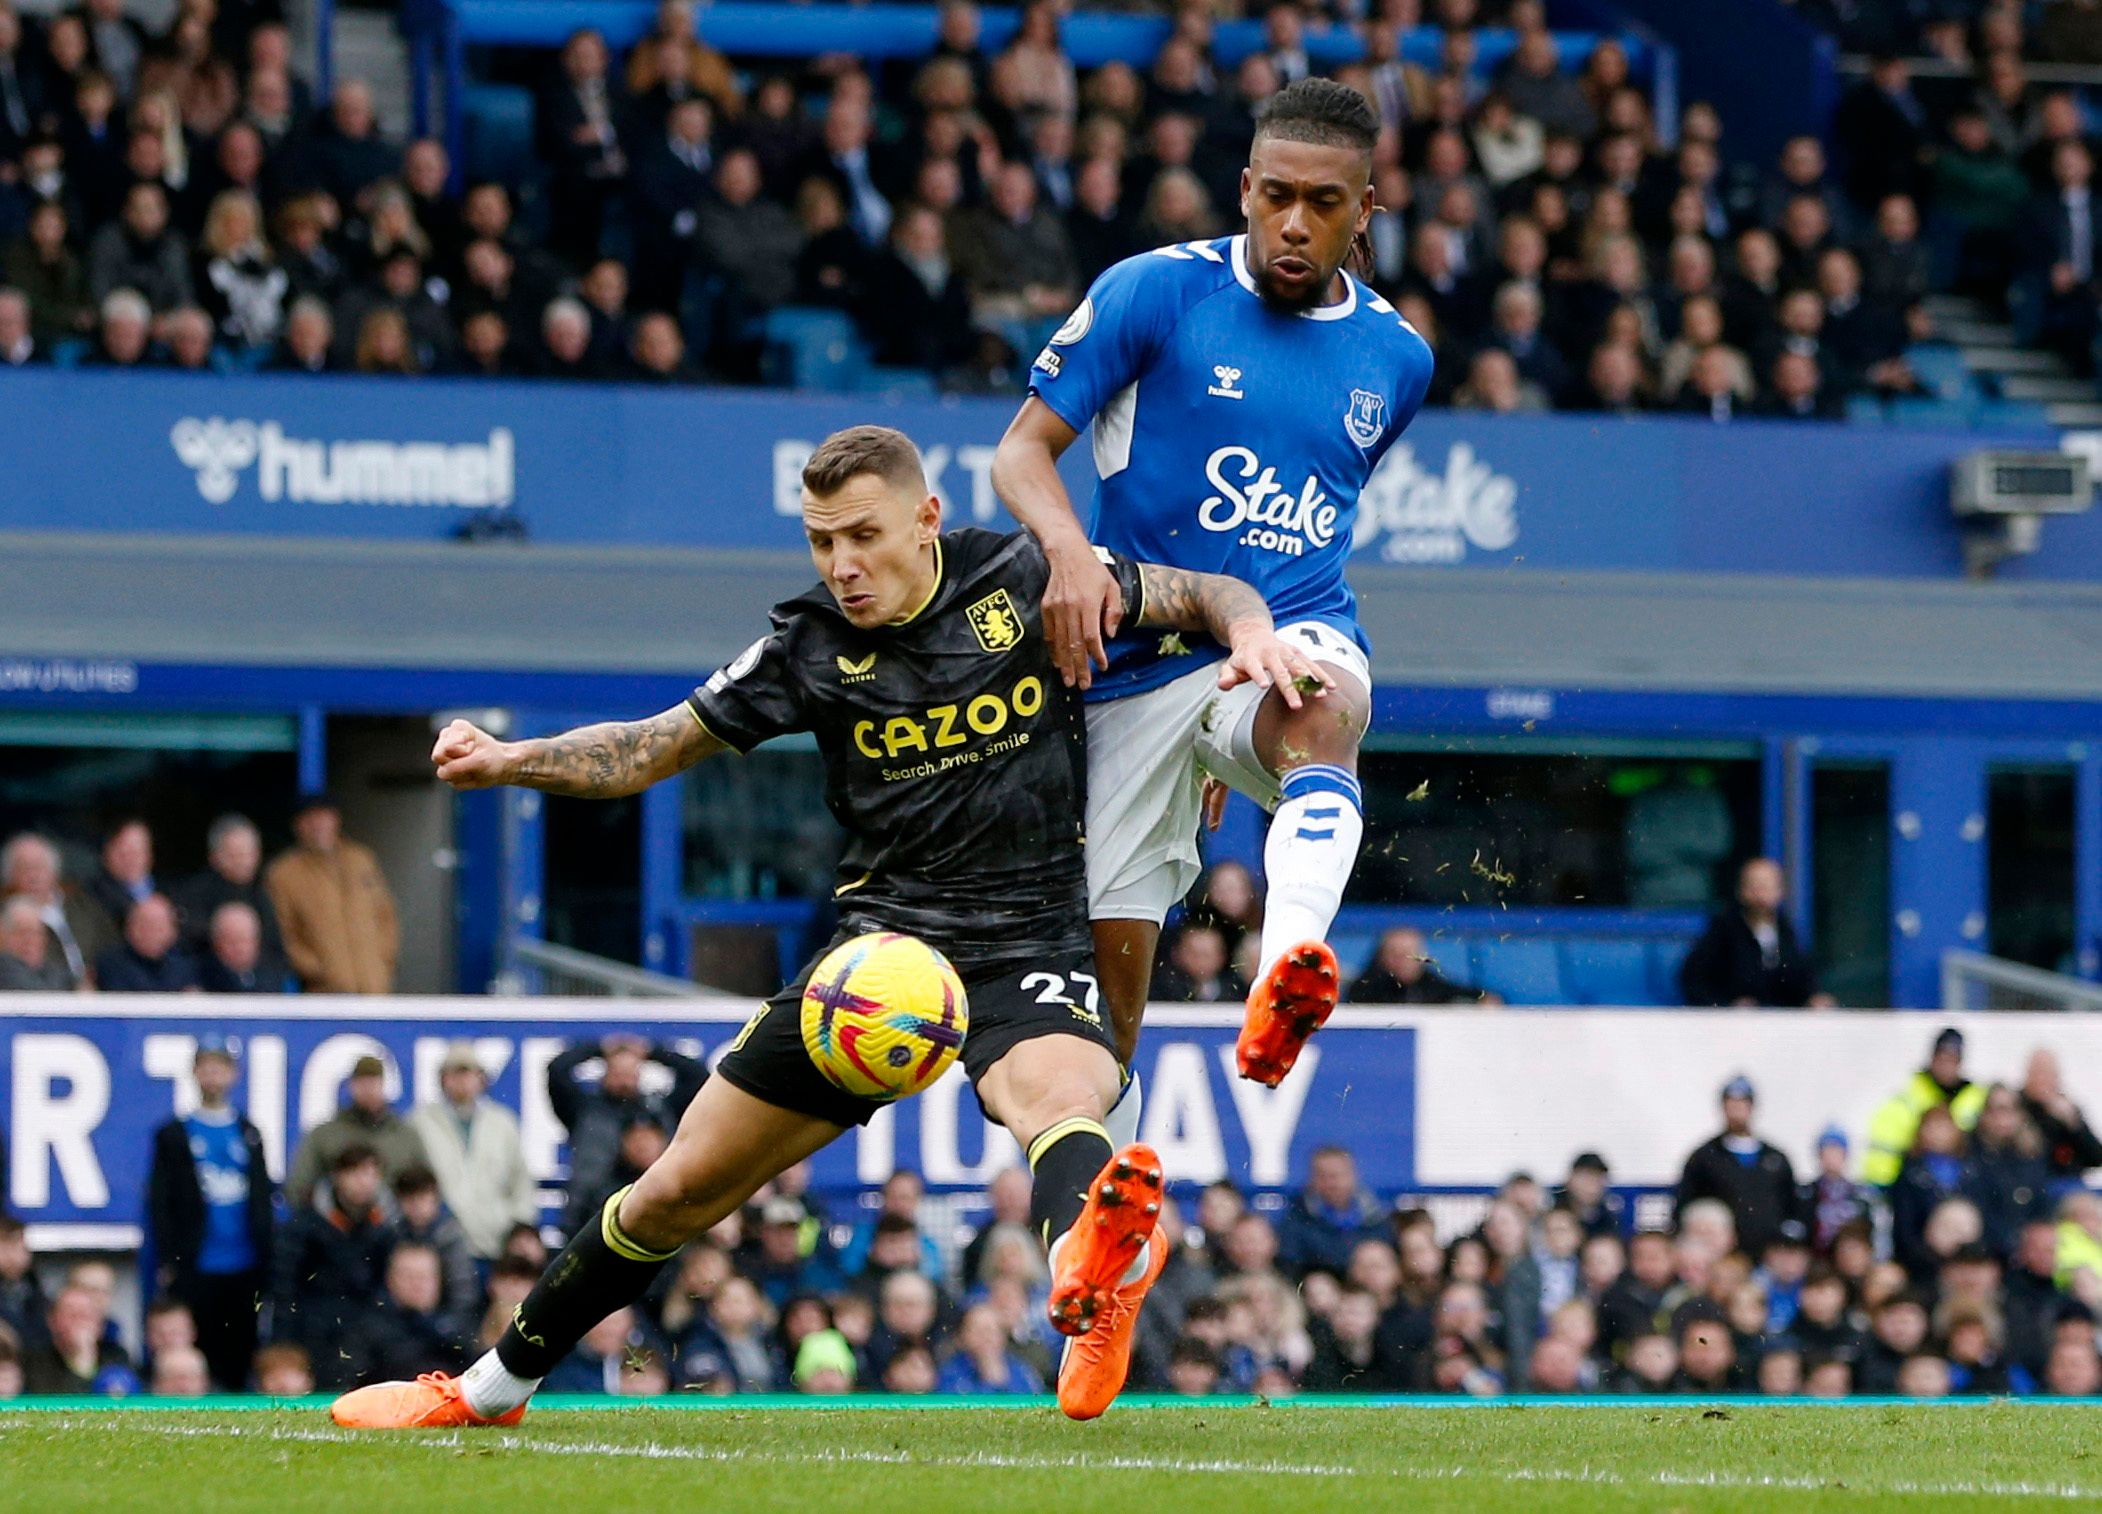 Soccer Football - Premier League - Everton v Aston Villa - Goodison Park, Liverpool, Britain - February 25, 2023 Aston Villa's Lucas Digne in action with Everton's Alex Iwobi Action Images via Reuters/Ed Sykes EDITORIAL USE ONLY. No use with unauthorized audio, video, data, fixture lists, club/league logos or 'live' services. Online in-match use limited to 75 images, no video emulation. No use in betting, games or single club /league/player publications.  Please contact your account representati